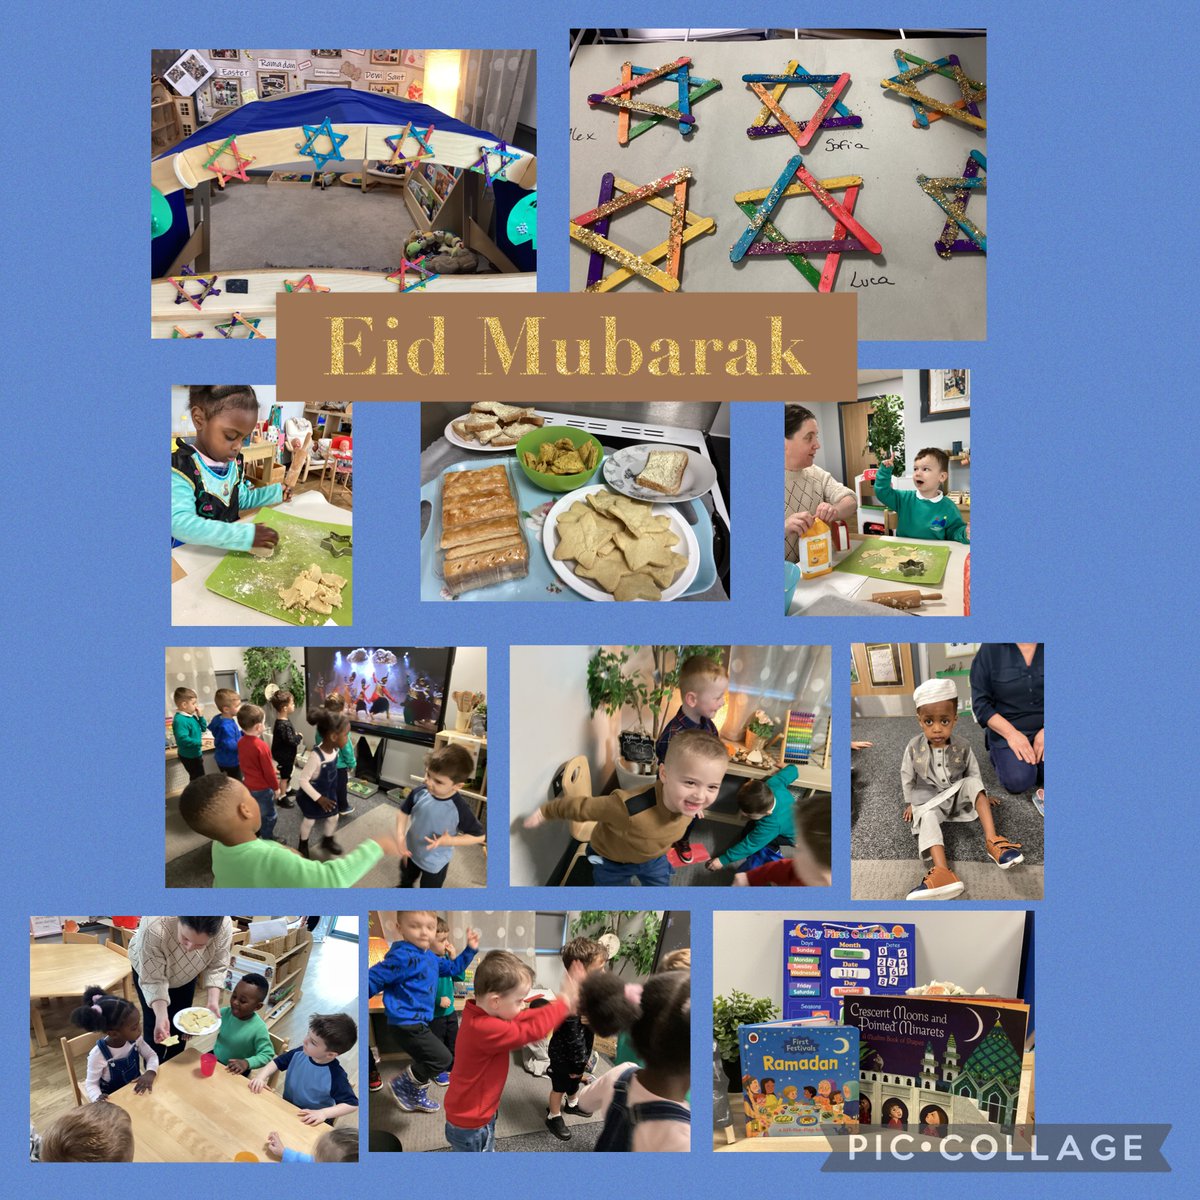 What a lovely day we've had in nursery. Eid Mubarak everyone! We have cooked, crafted, danced, read stories and sung our Ramadan Moon song. We also had a party and tried some traditional foods. Da iawn pawb! #bluebellmps #mpsbluebell #Eidmubarak2024